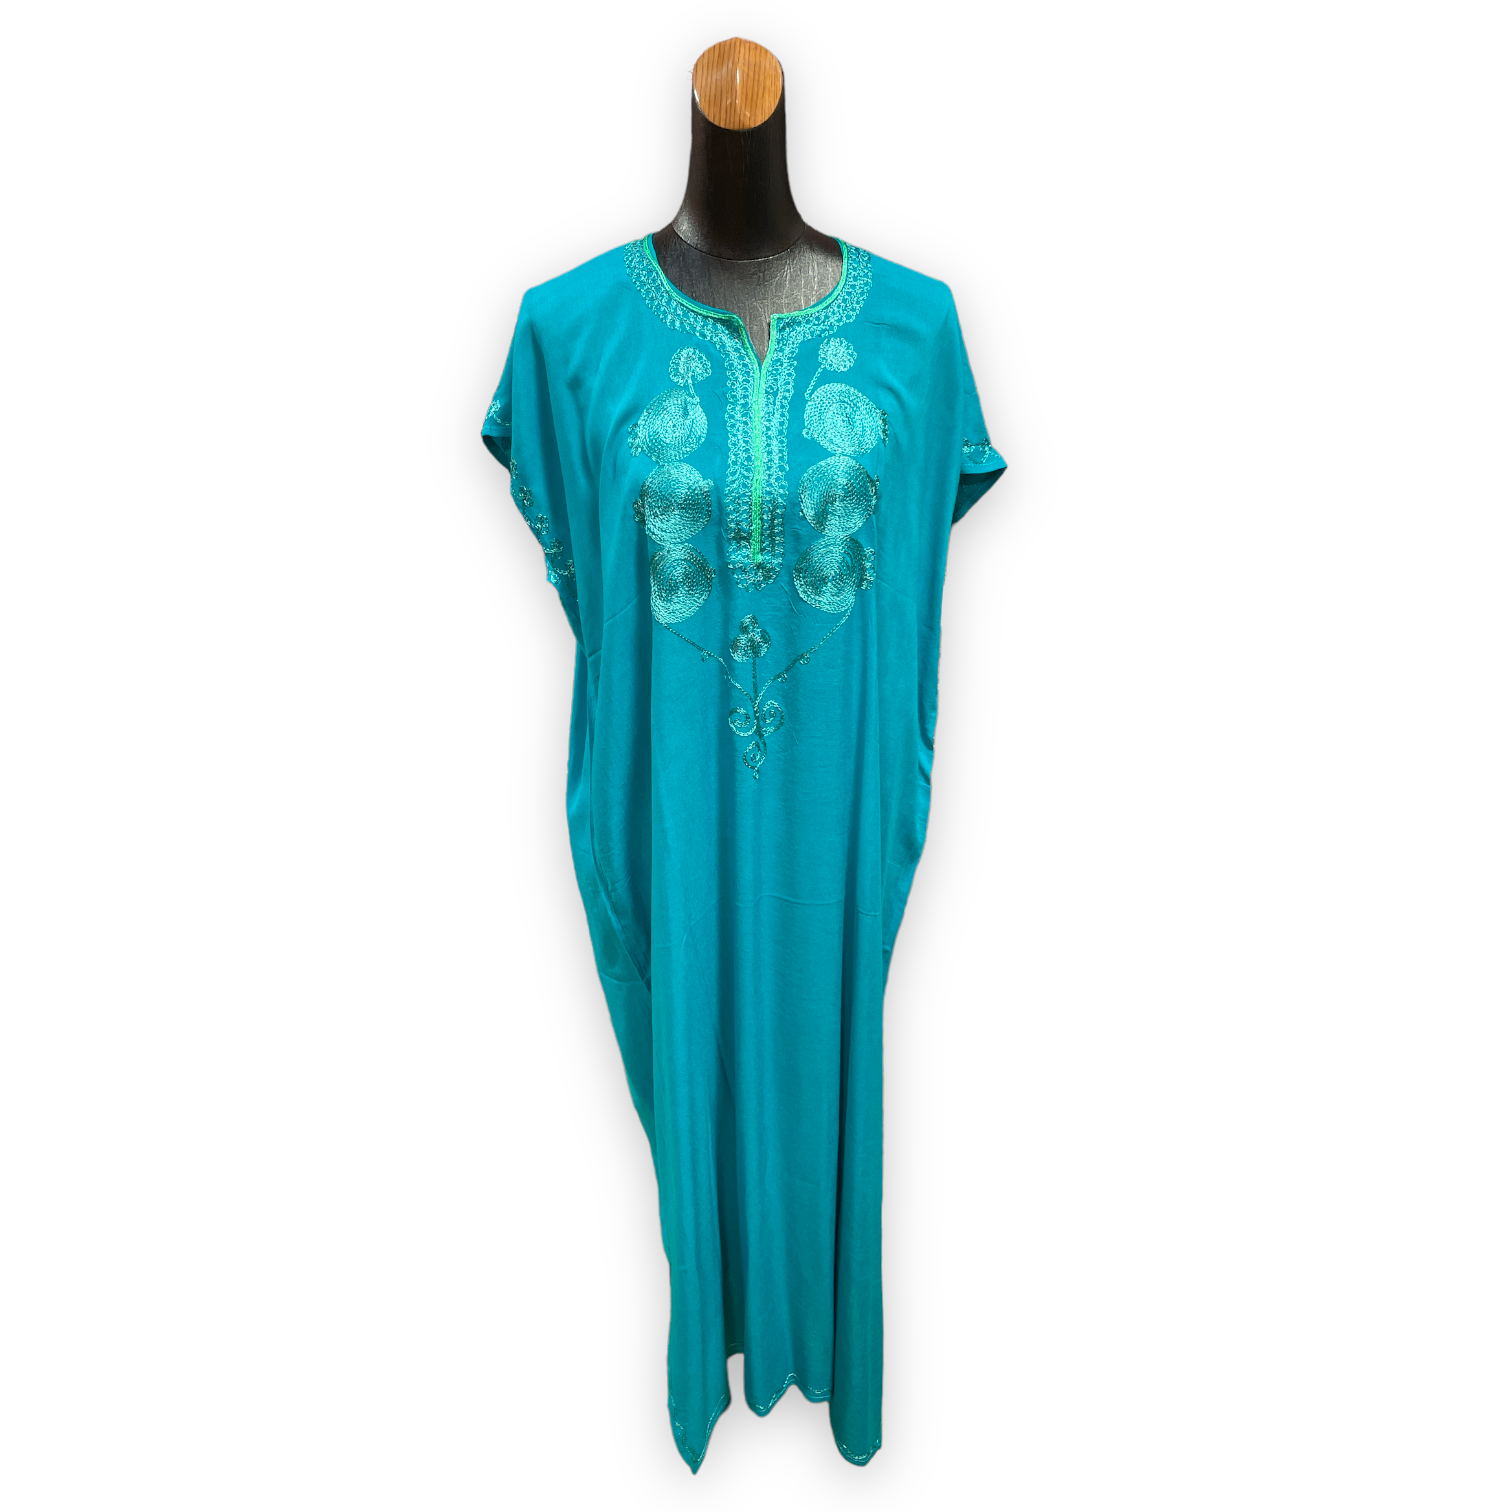 Women's Cotton Budget Friendly Everyday Floral Caftans